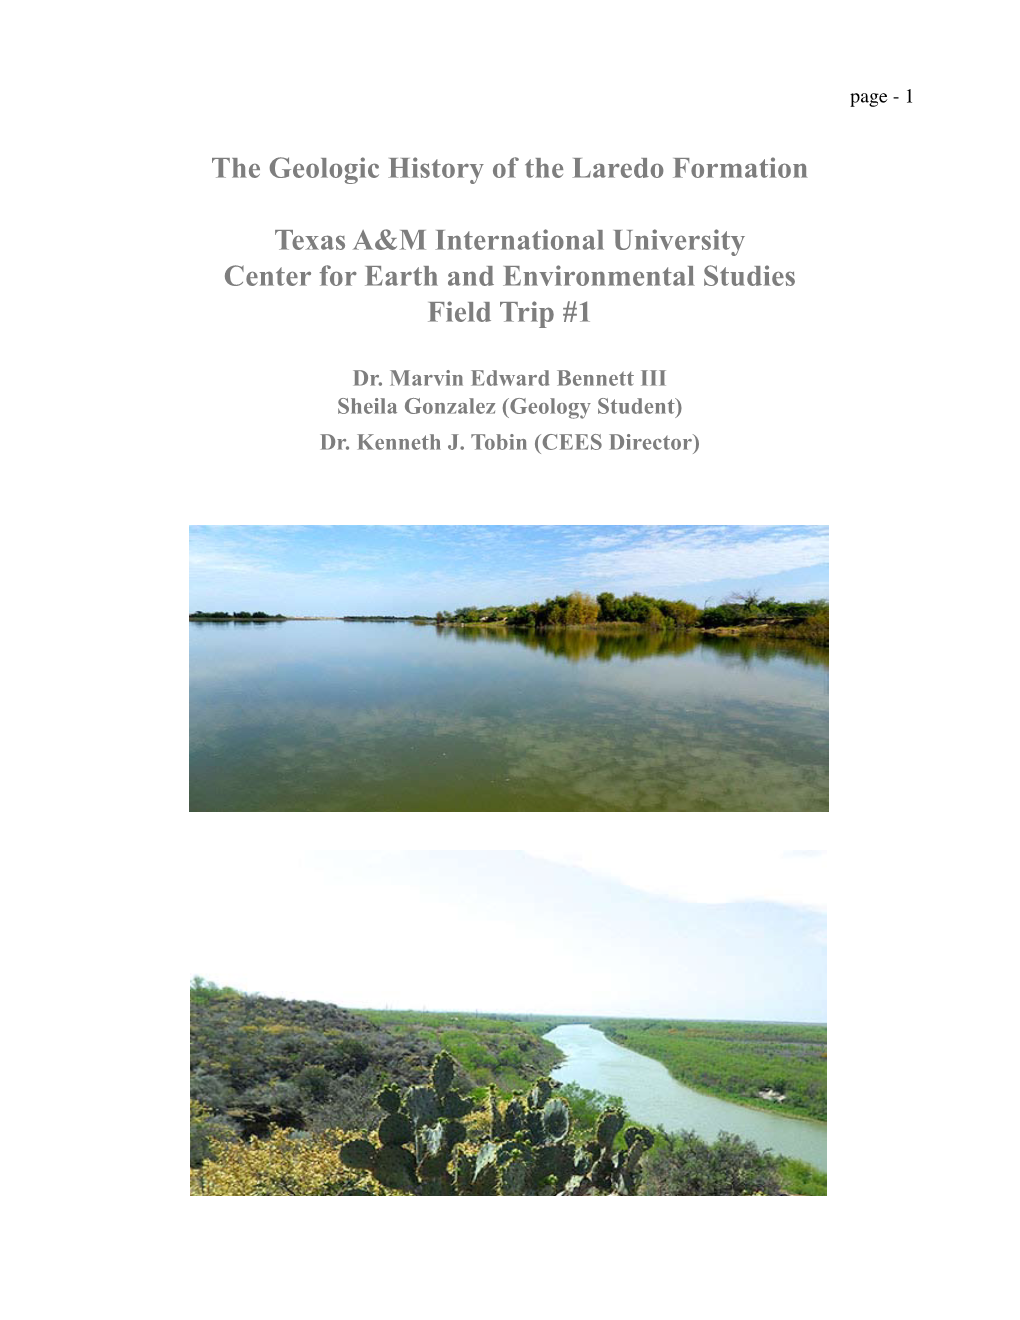 The Geologic History of the Laredo Formation Texas A&M International